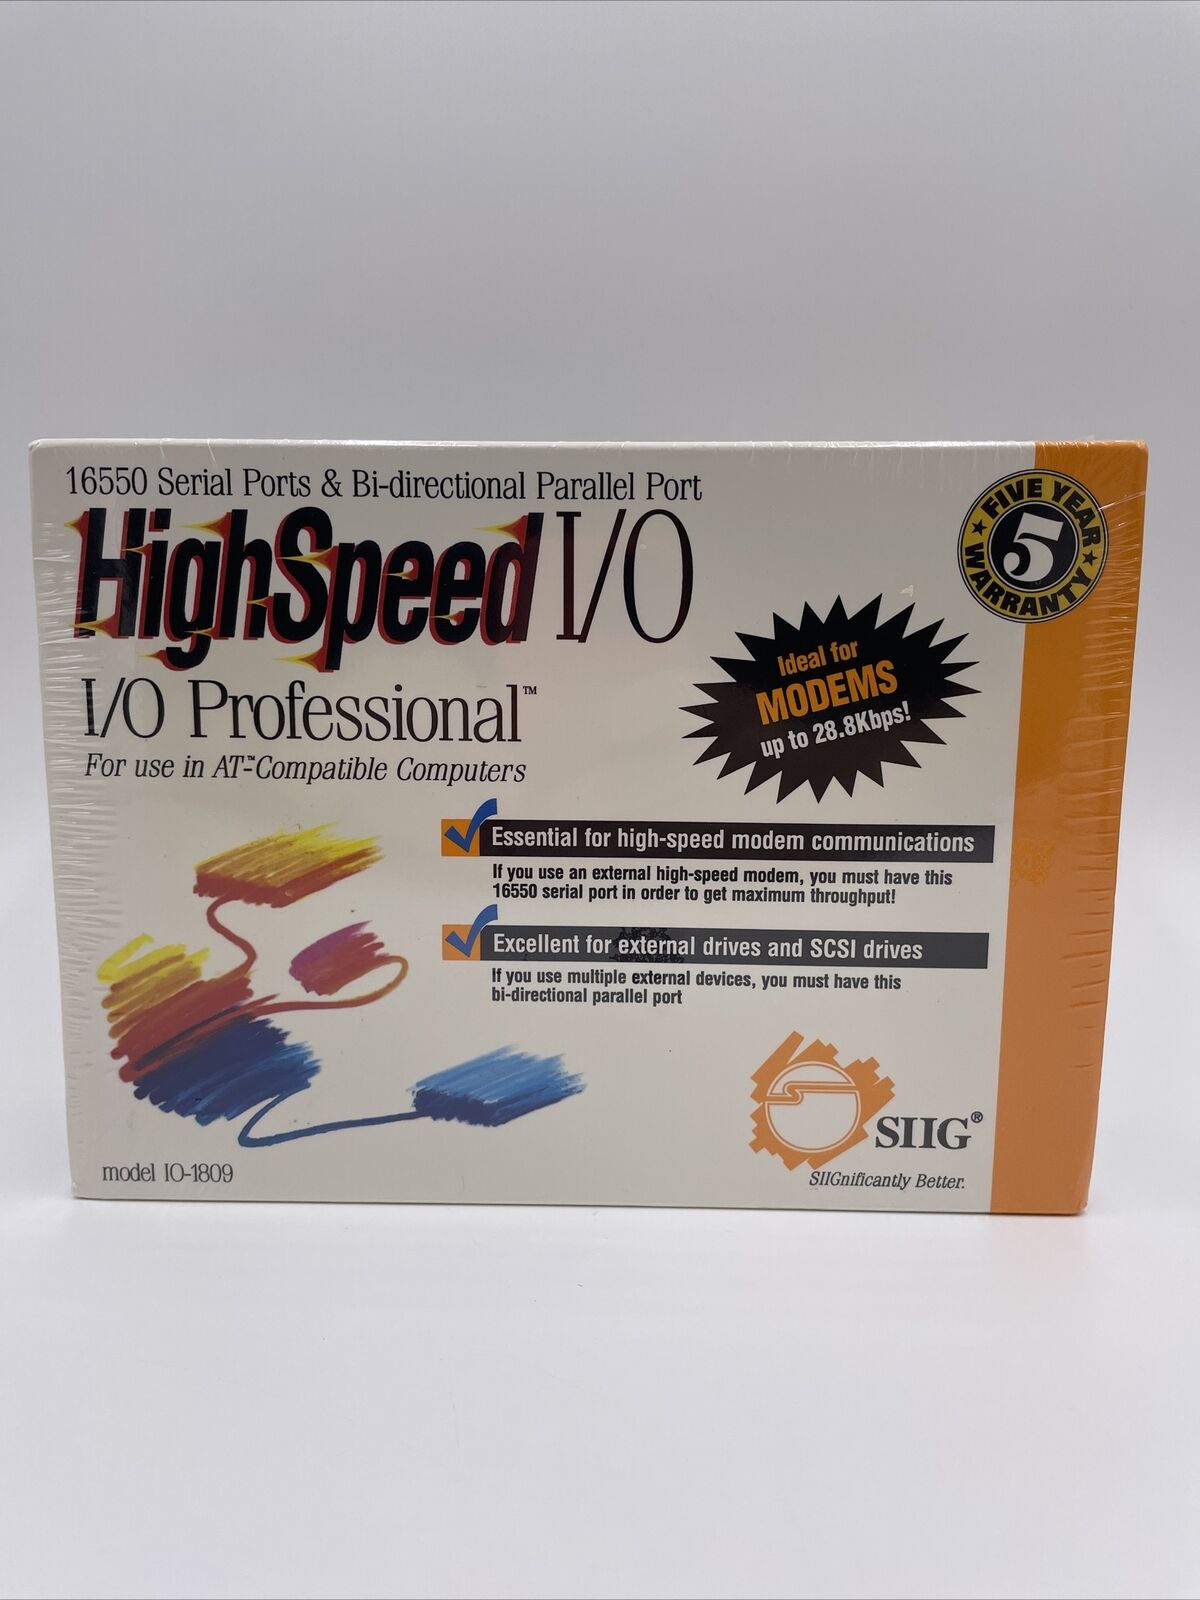 NEW Sealed SIIG IO-1809 High Speed 16550 Serial&Bi-directional Parallel Port